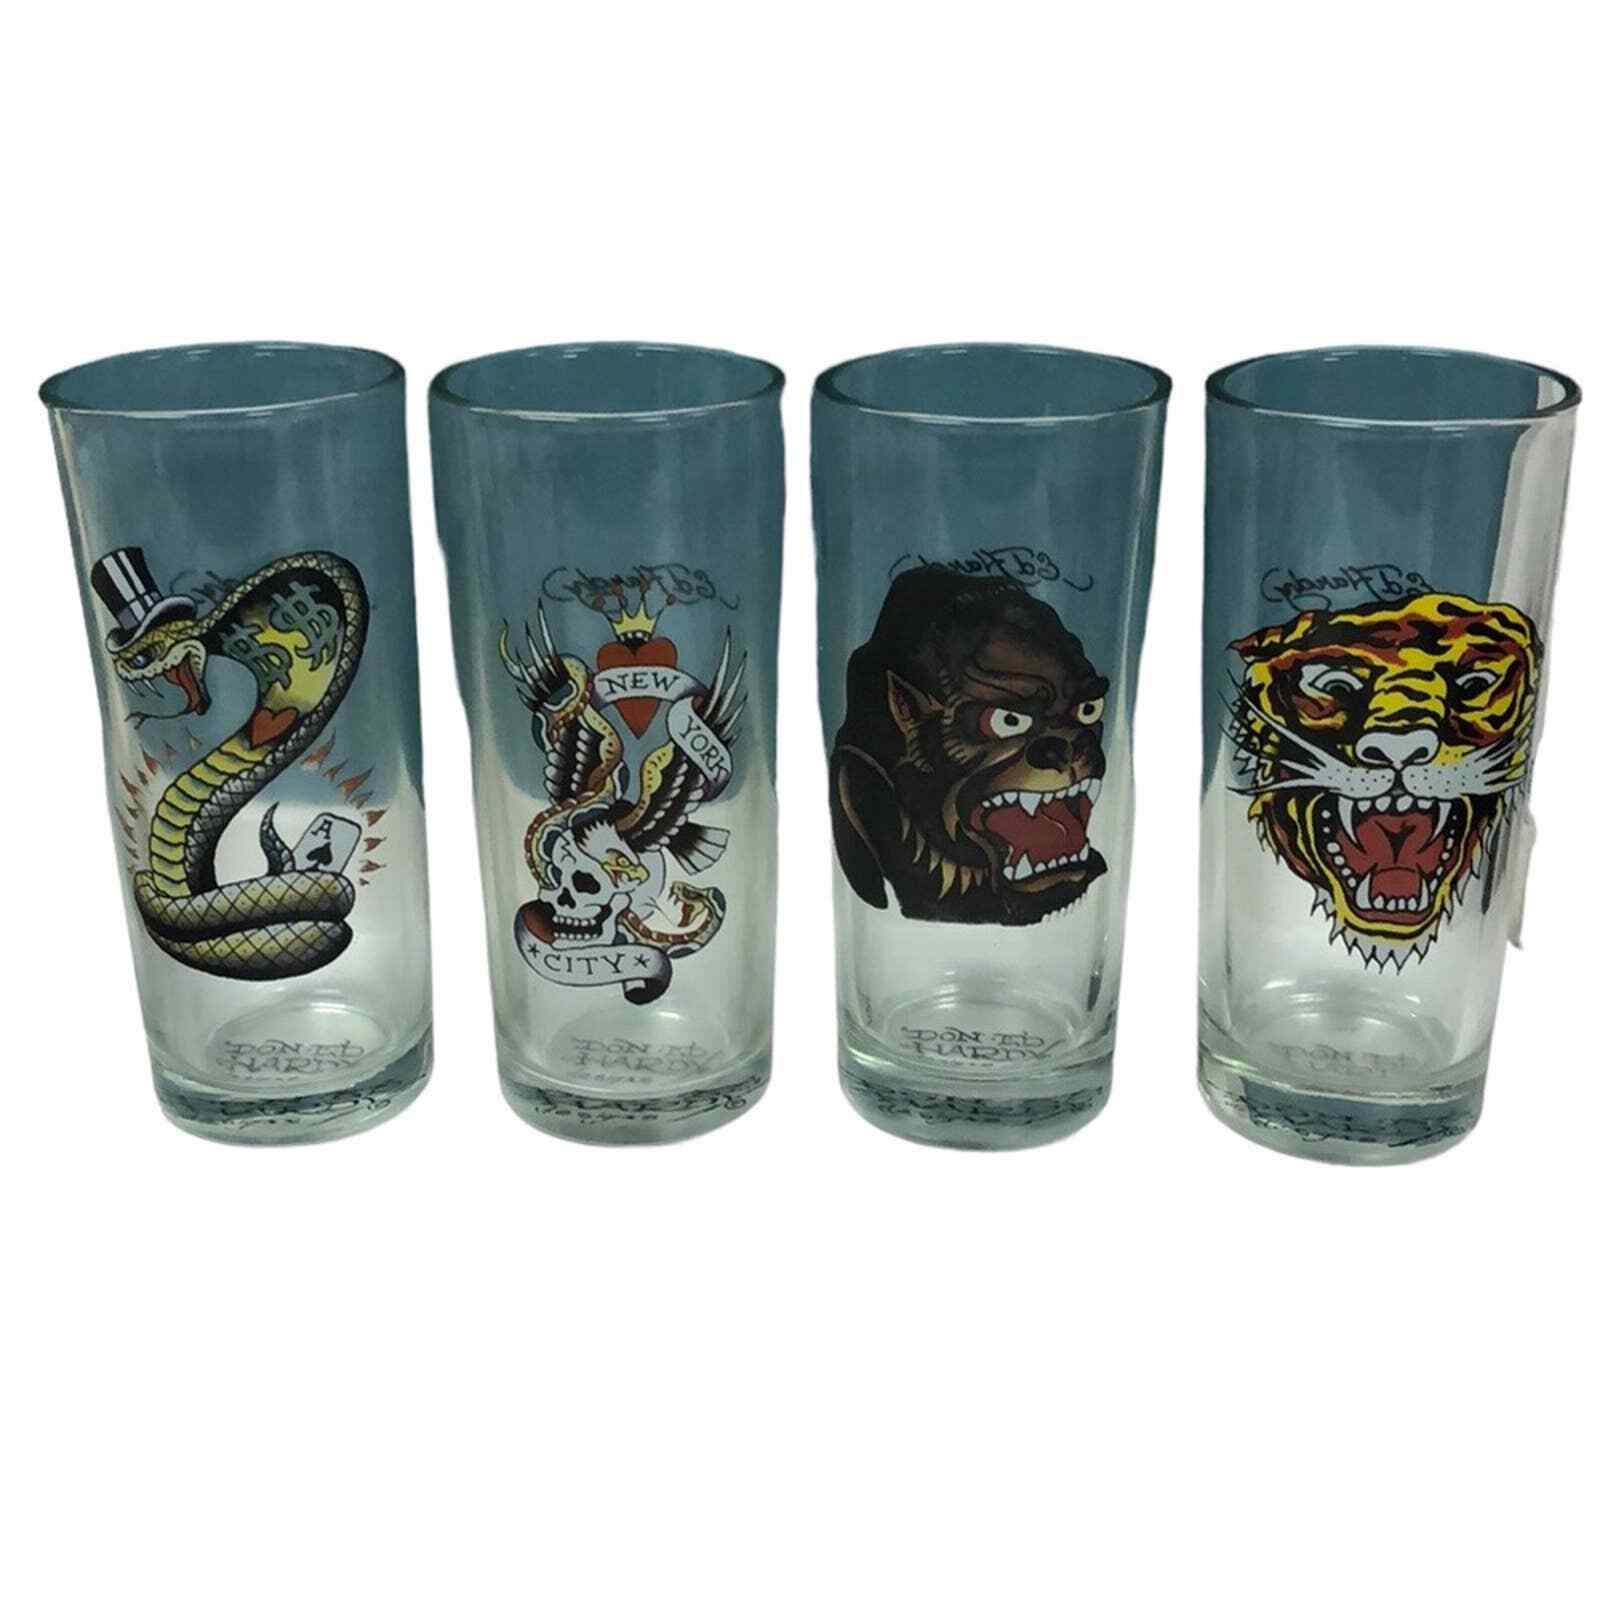 Set of 4 DON ED HARDY BY CHRISTIAN AUDIGIER BEER GLASSES 6.5” TALL 8 OZ. Lot